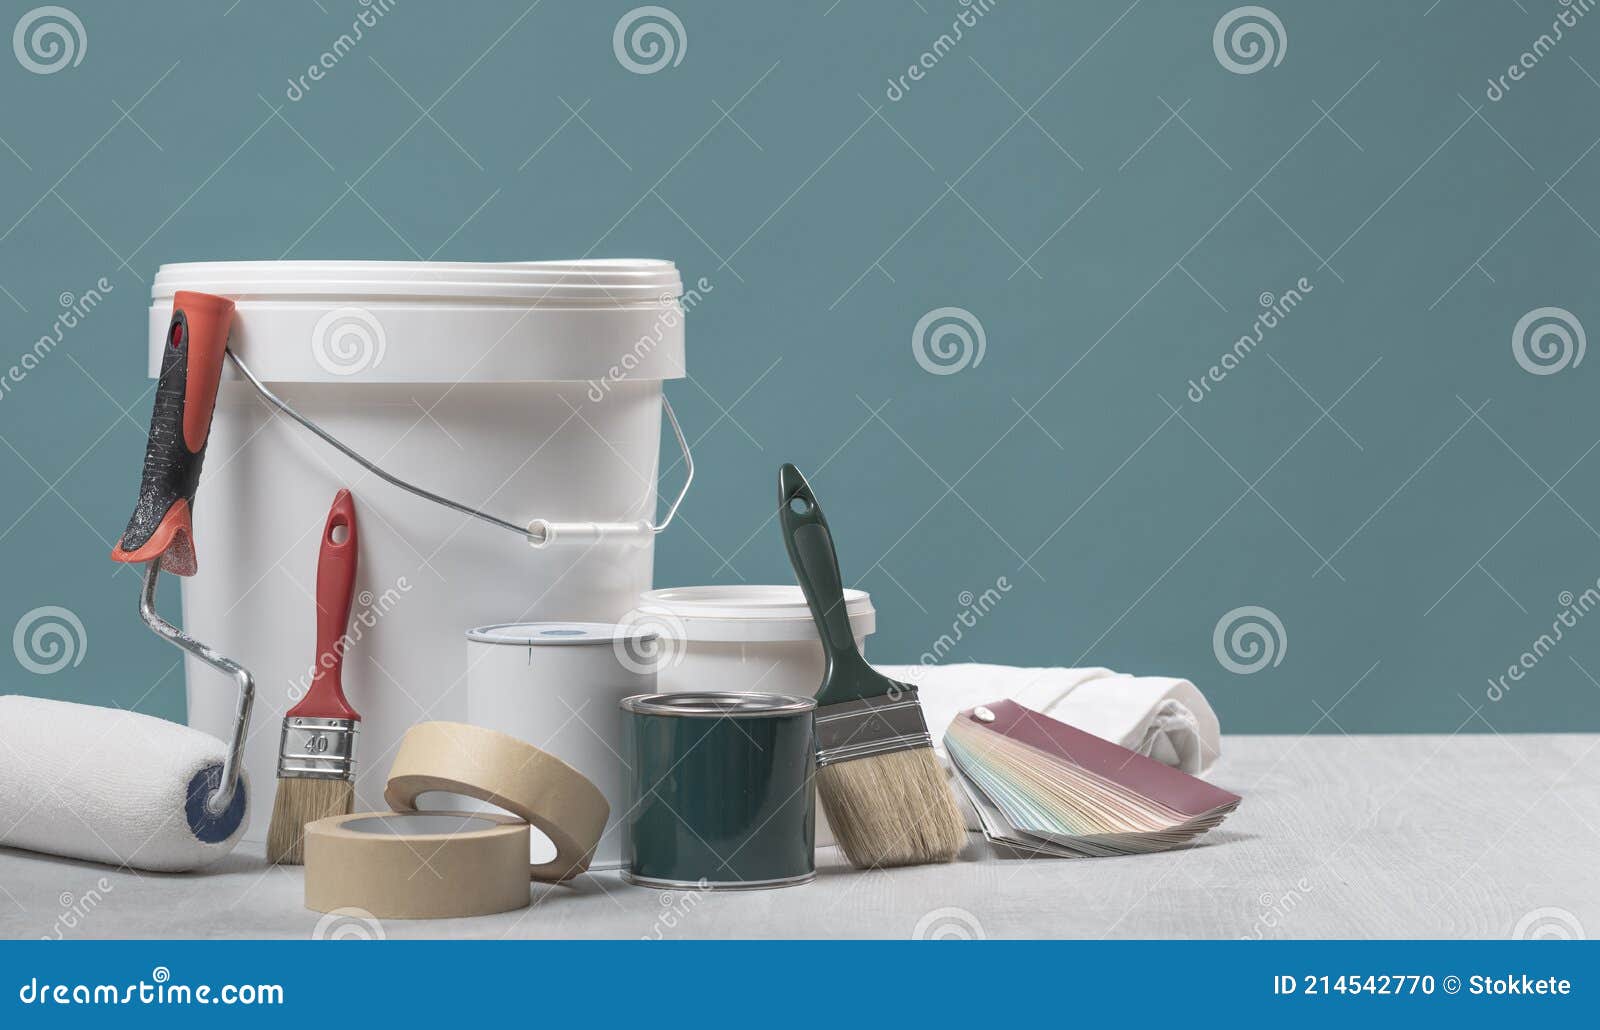 professional home decorator and painter tools